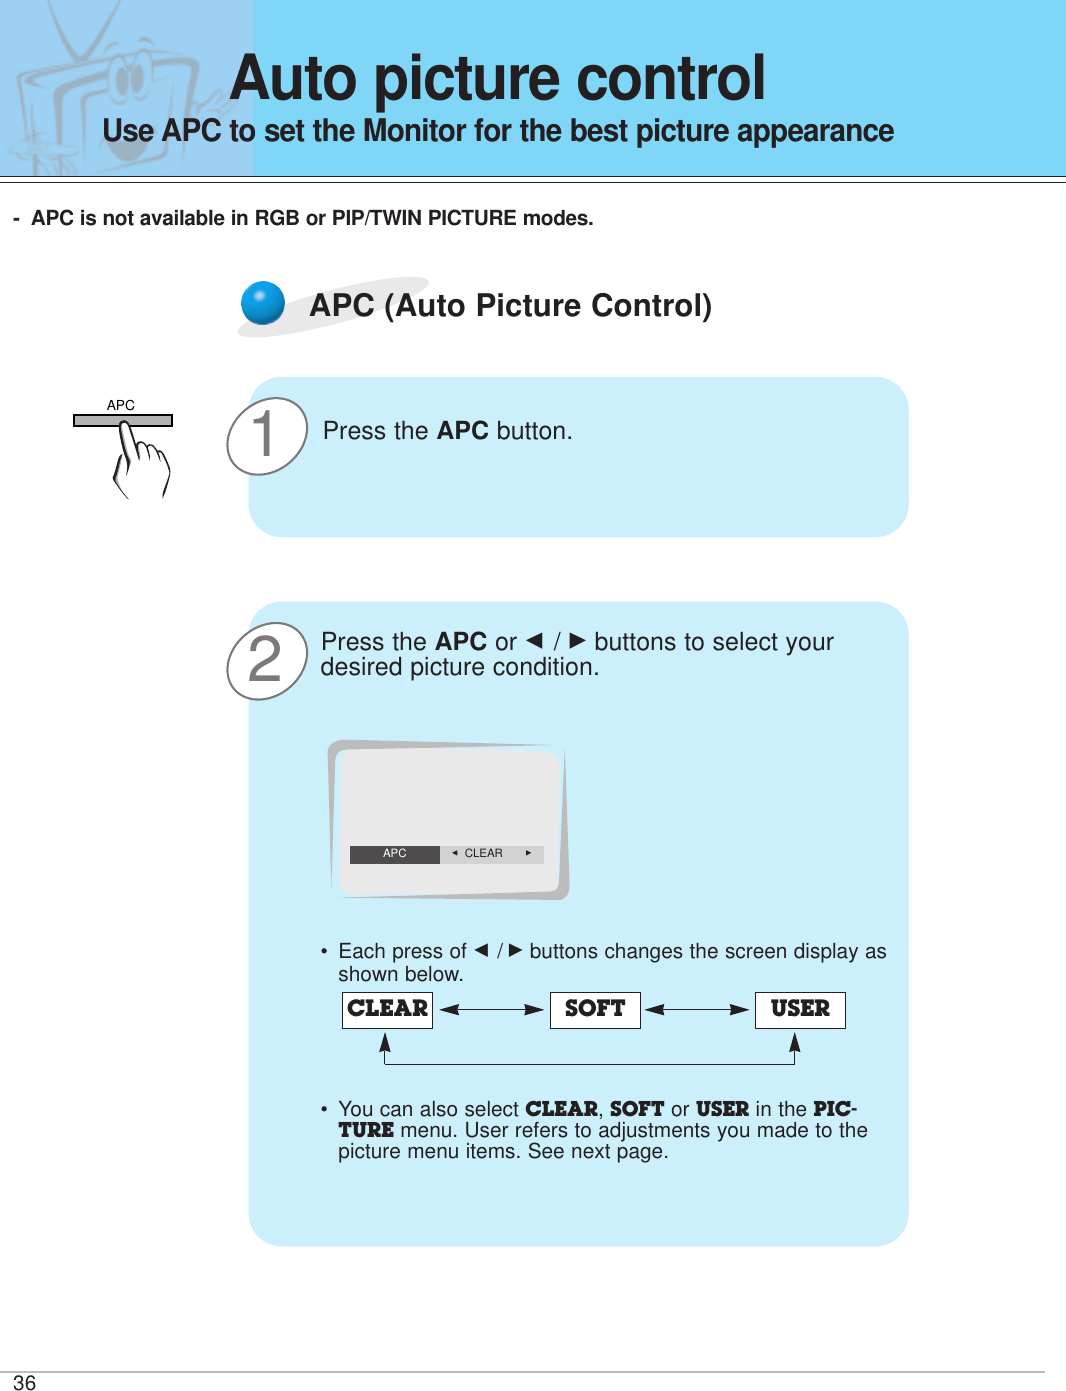 3621APC (Auto Picture Control)Press the APC button.Press the APC or F / Gbuttons to select yourdesired picture condition.•Each press of F /Gbuttons changes the screen display asshown below.• You can also select CLEAR, SOFT or USER in the PIC-TURE menu. User refers to adjustments you made to thepicture menu items. See next page.CLEAR SOFT USERF  CLEAR    GAPCAuto picture controlUse APC to set the Monitor for the best picture appearance-APC is not available in RGB or PIP/TWIN PICTURE modes.APC